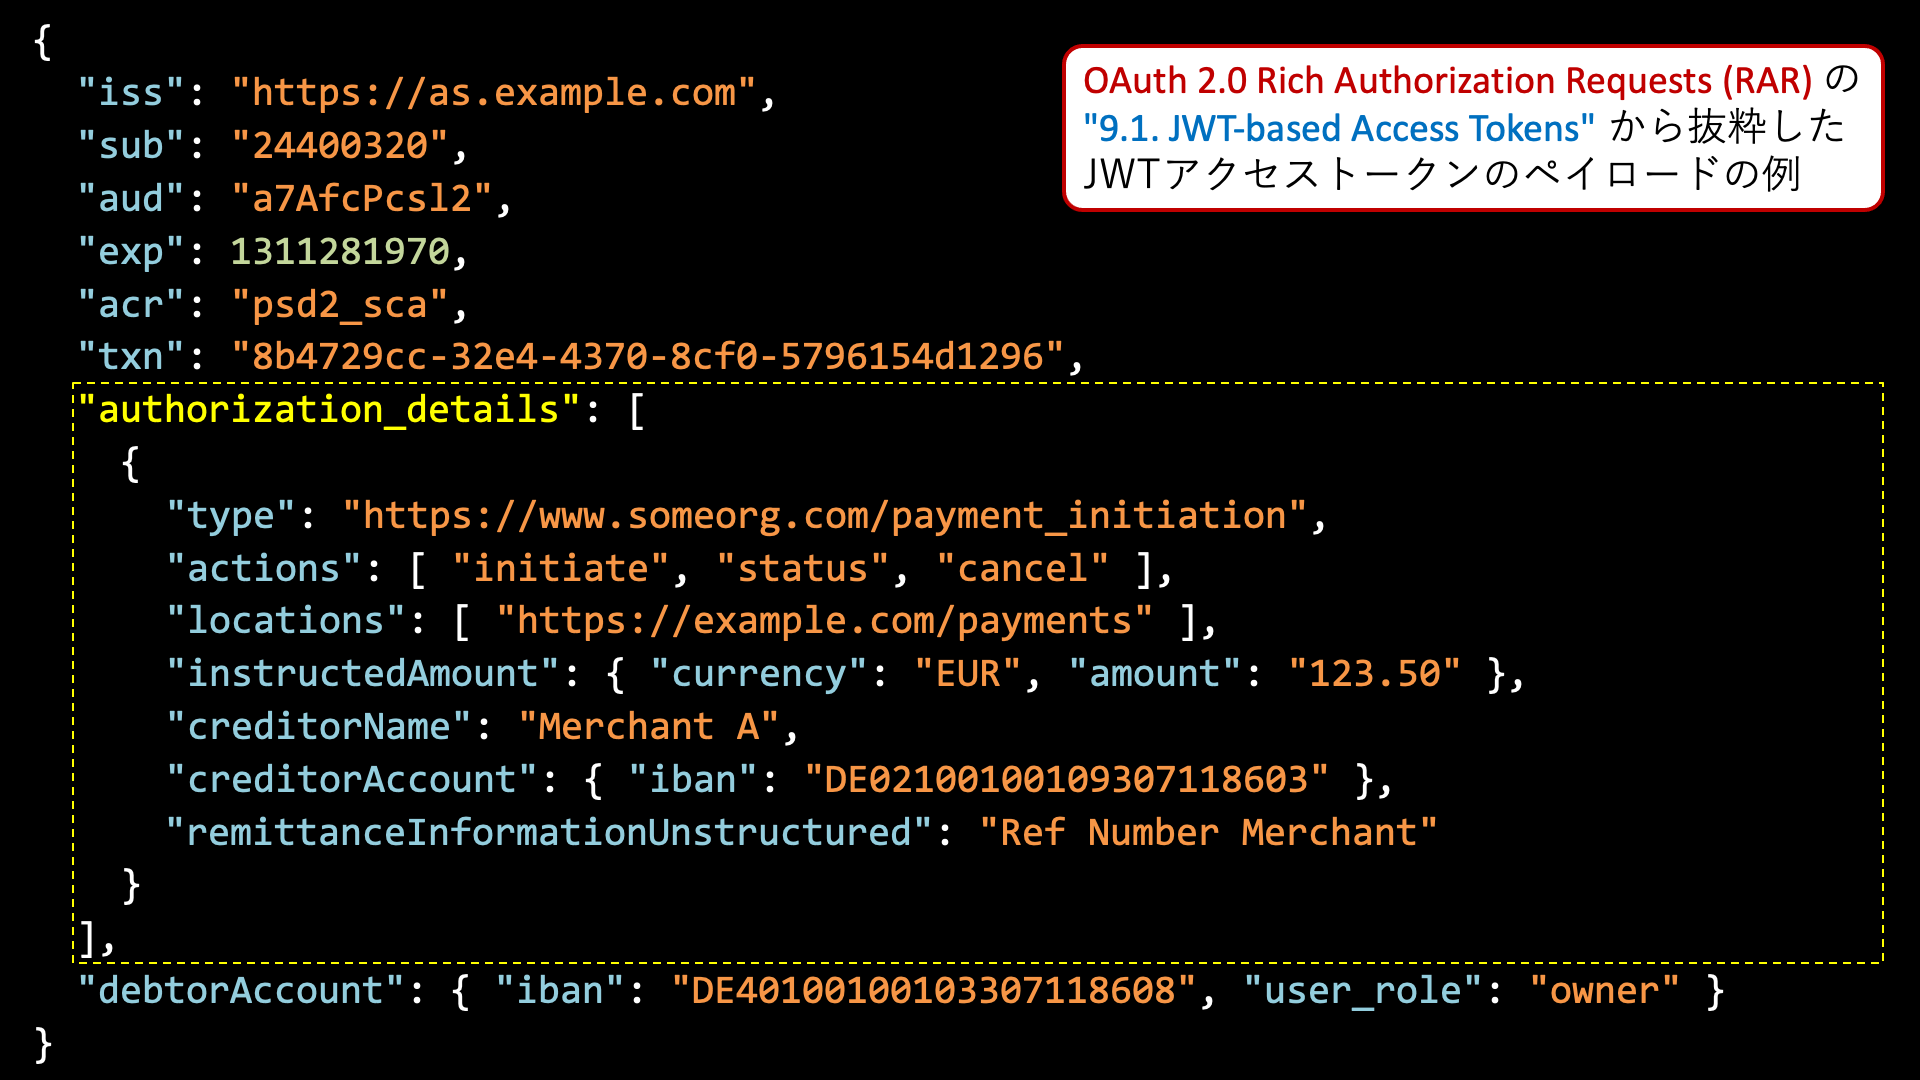 authorization_details-in-jwt-access-token.ja.png